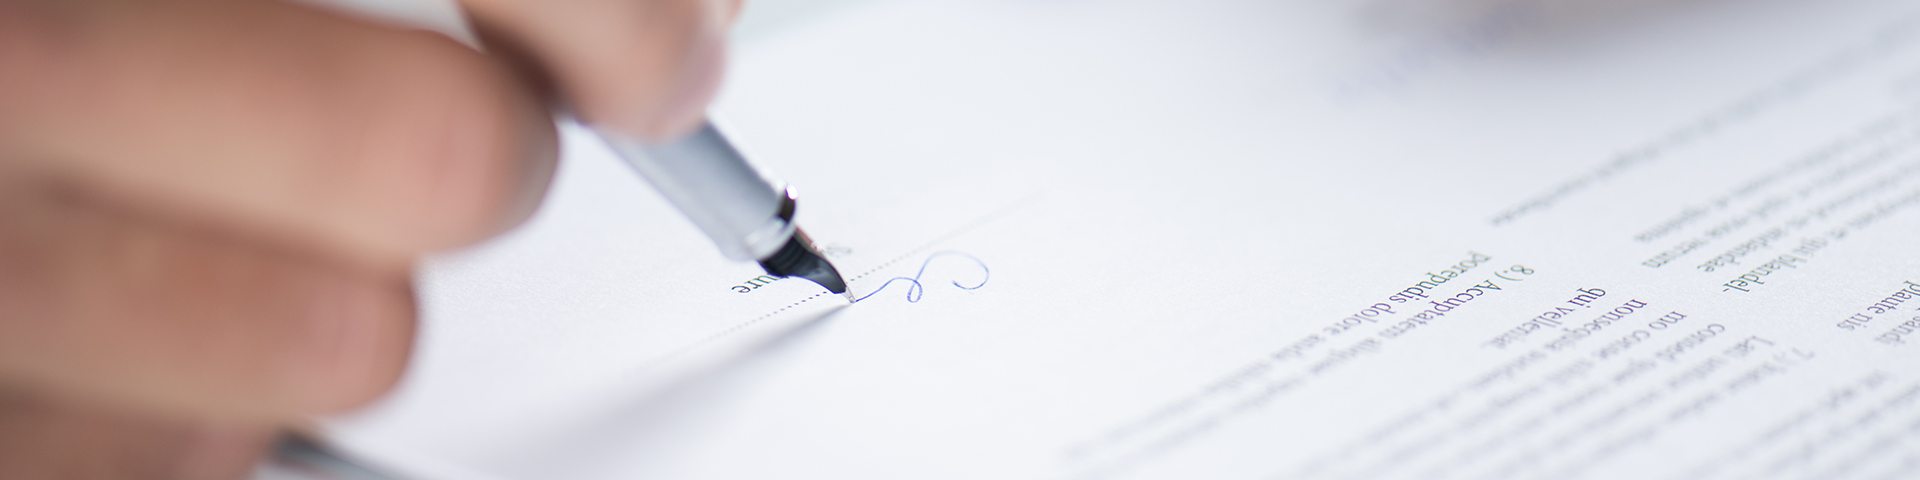 a hand writing with a pen on a legal document